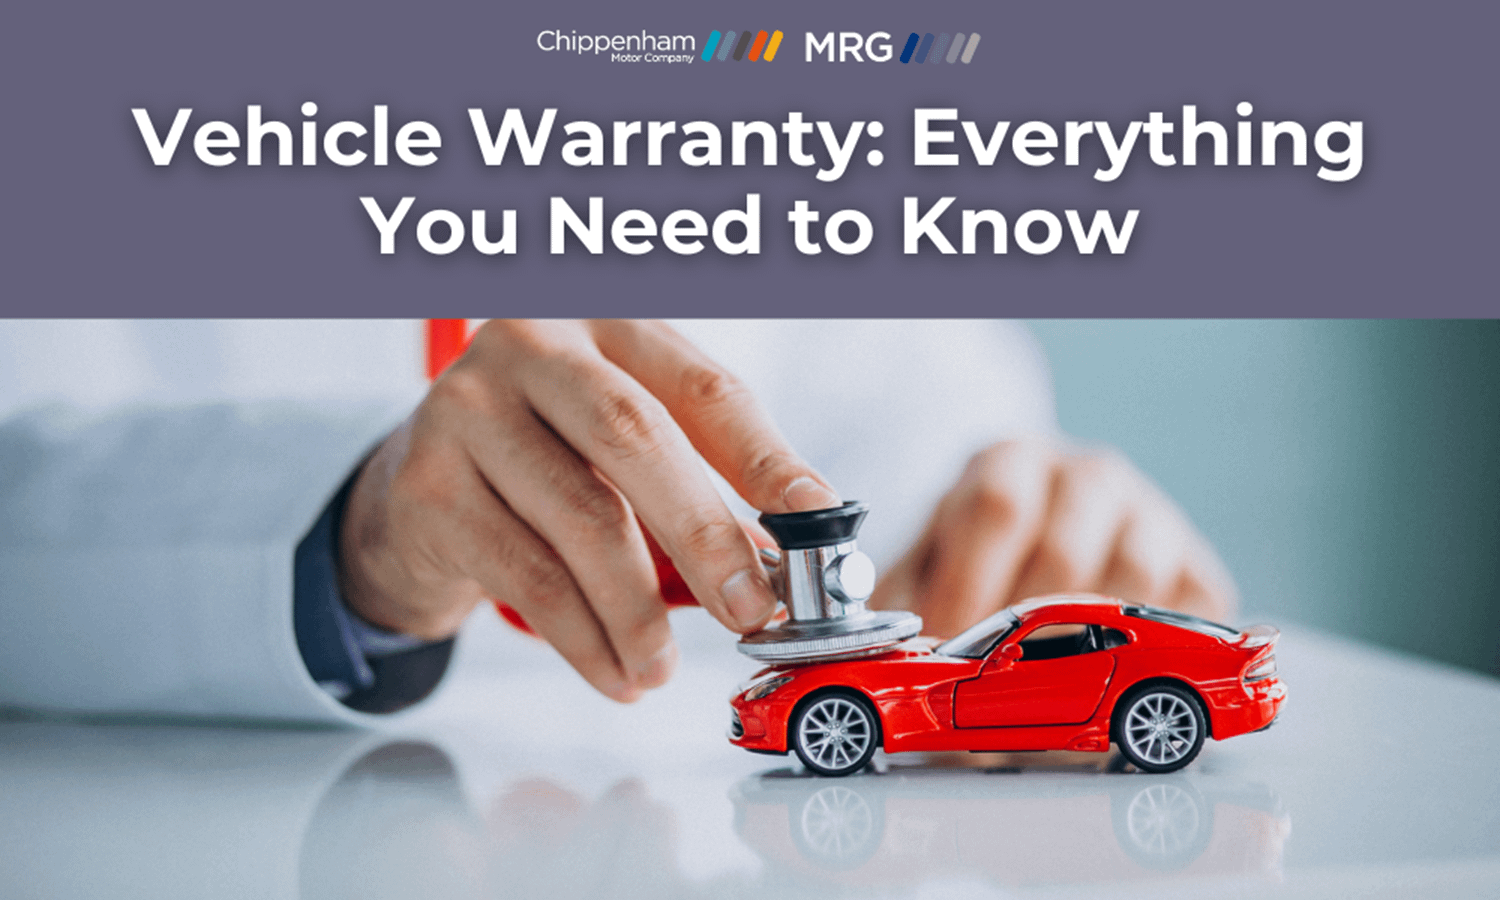 Vehicle Warranty: Everything You Need to Know